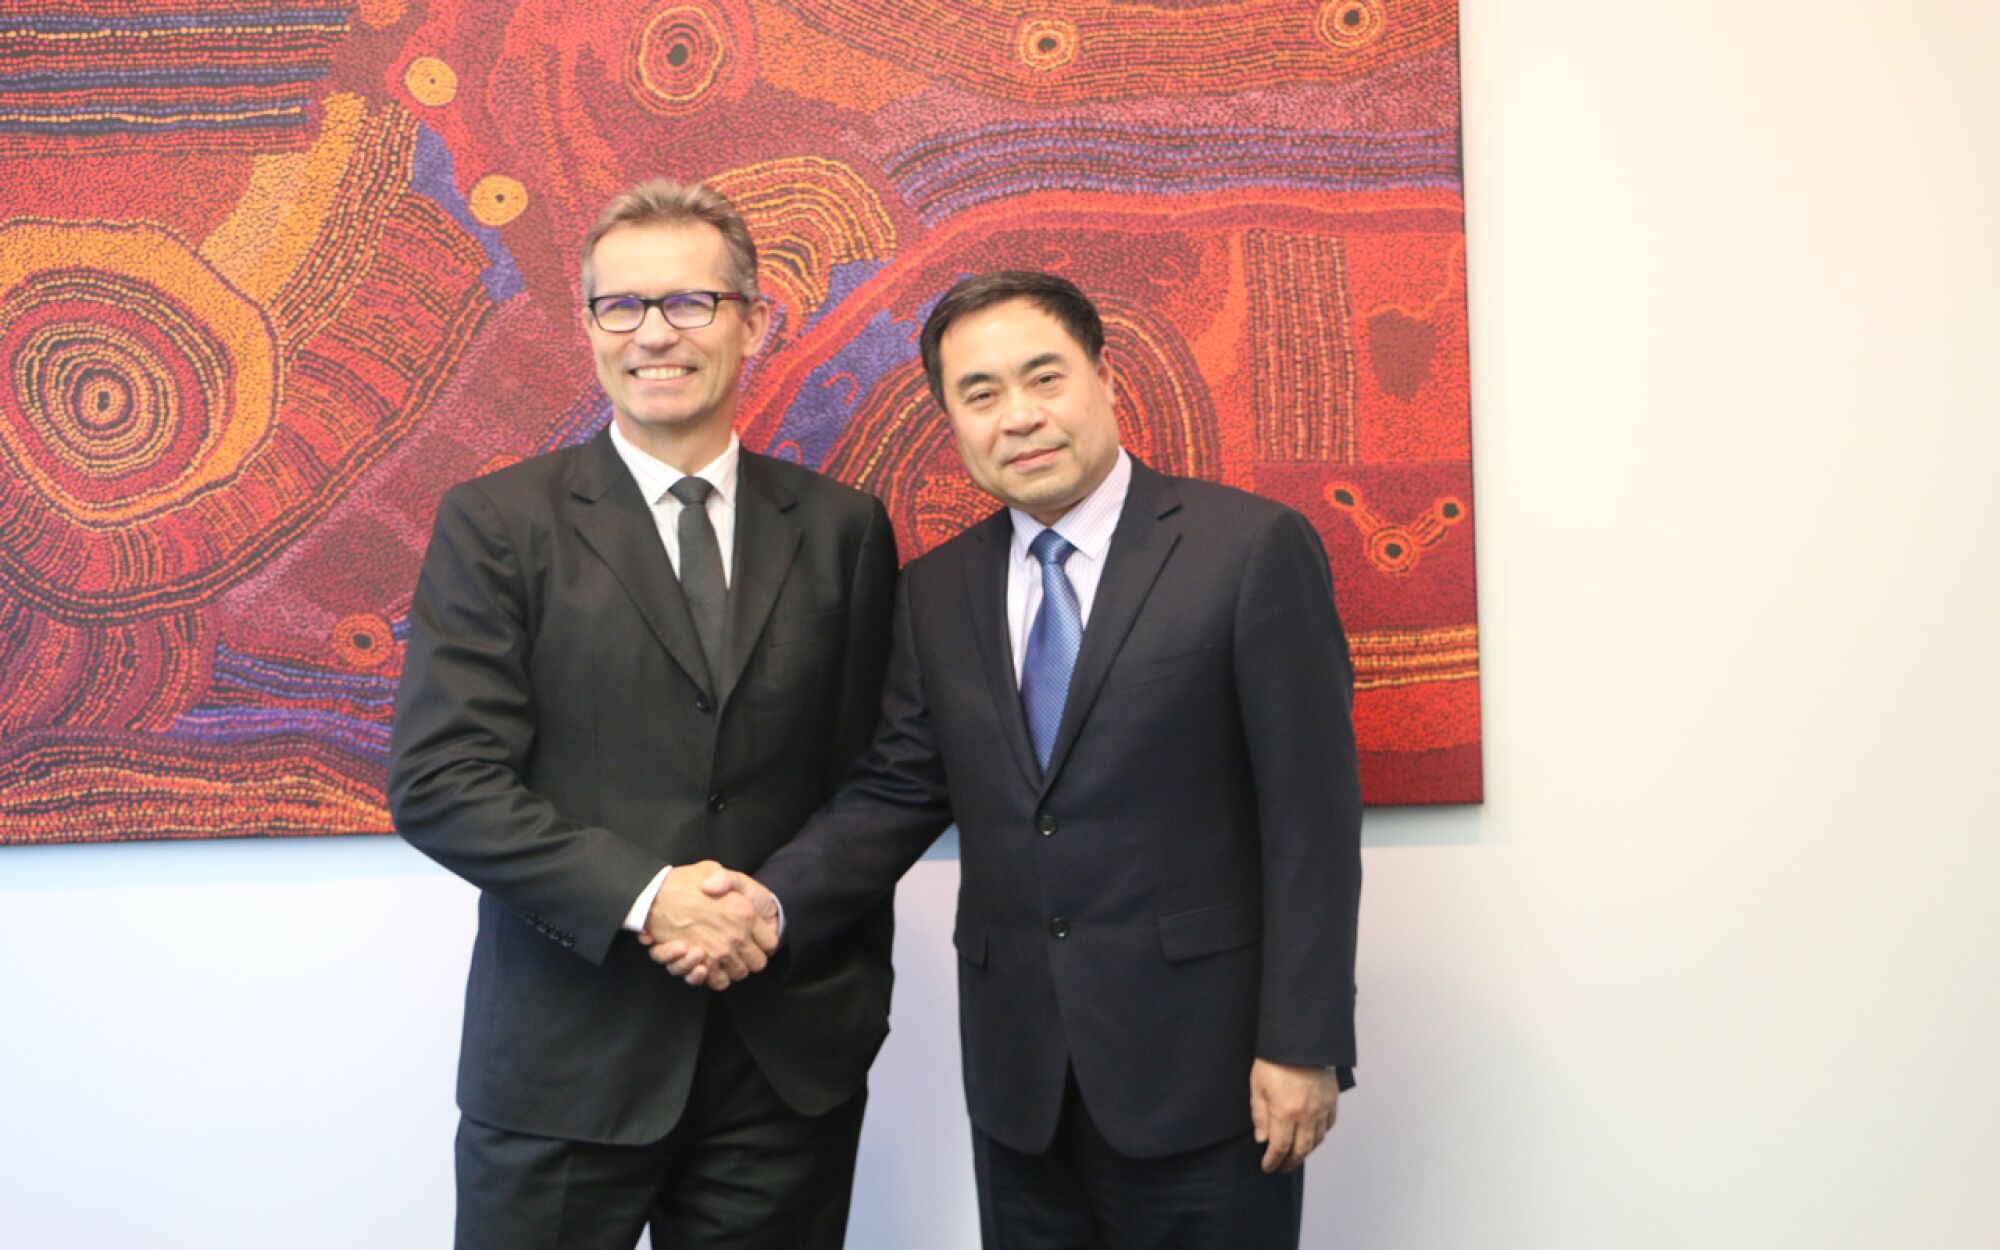 Peter Høj, vice chancellor of the University of Queensland, shakes hands with Chinese consul general Xu Jie.